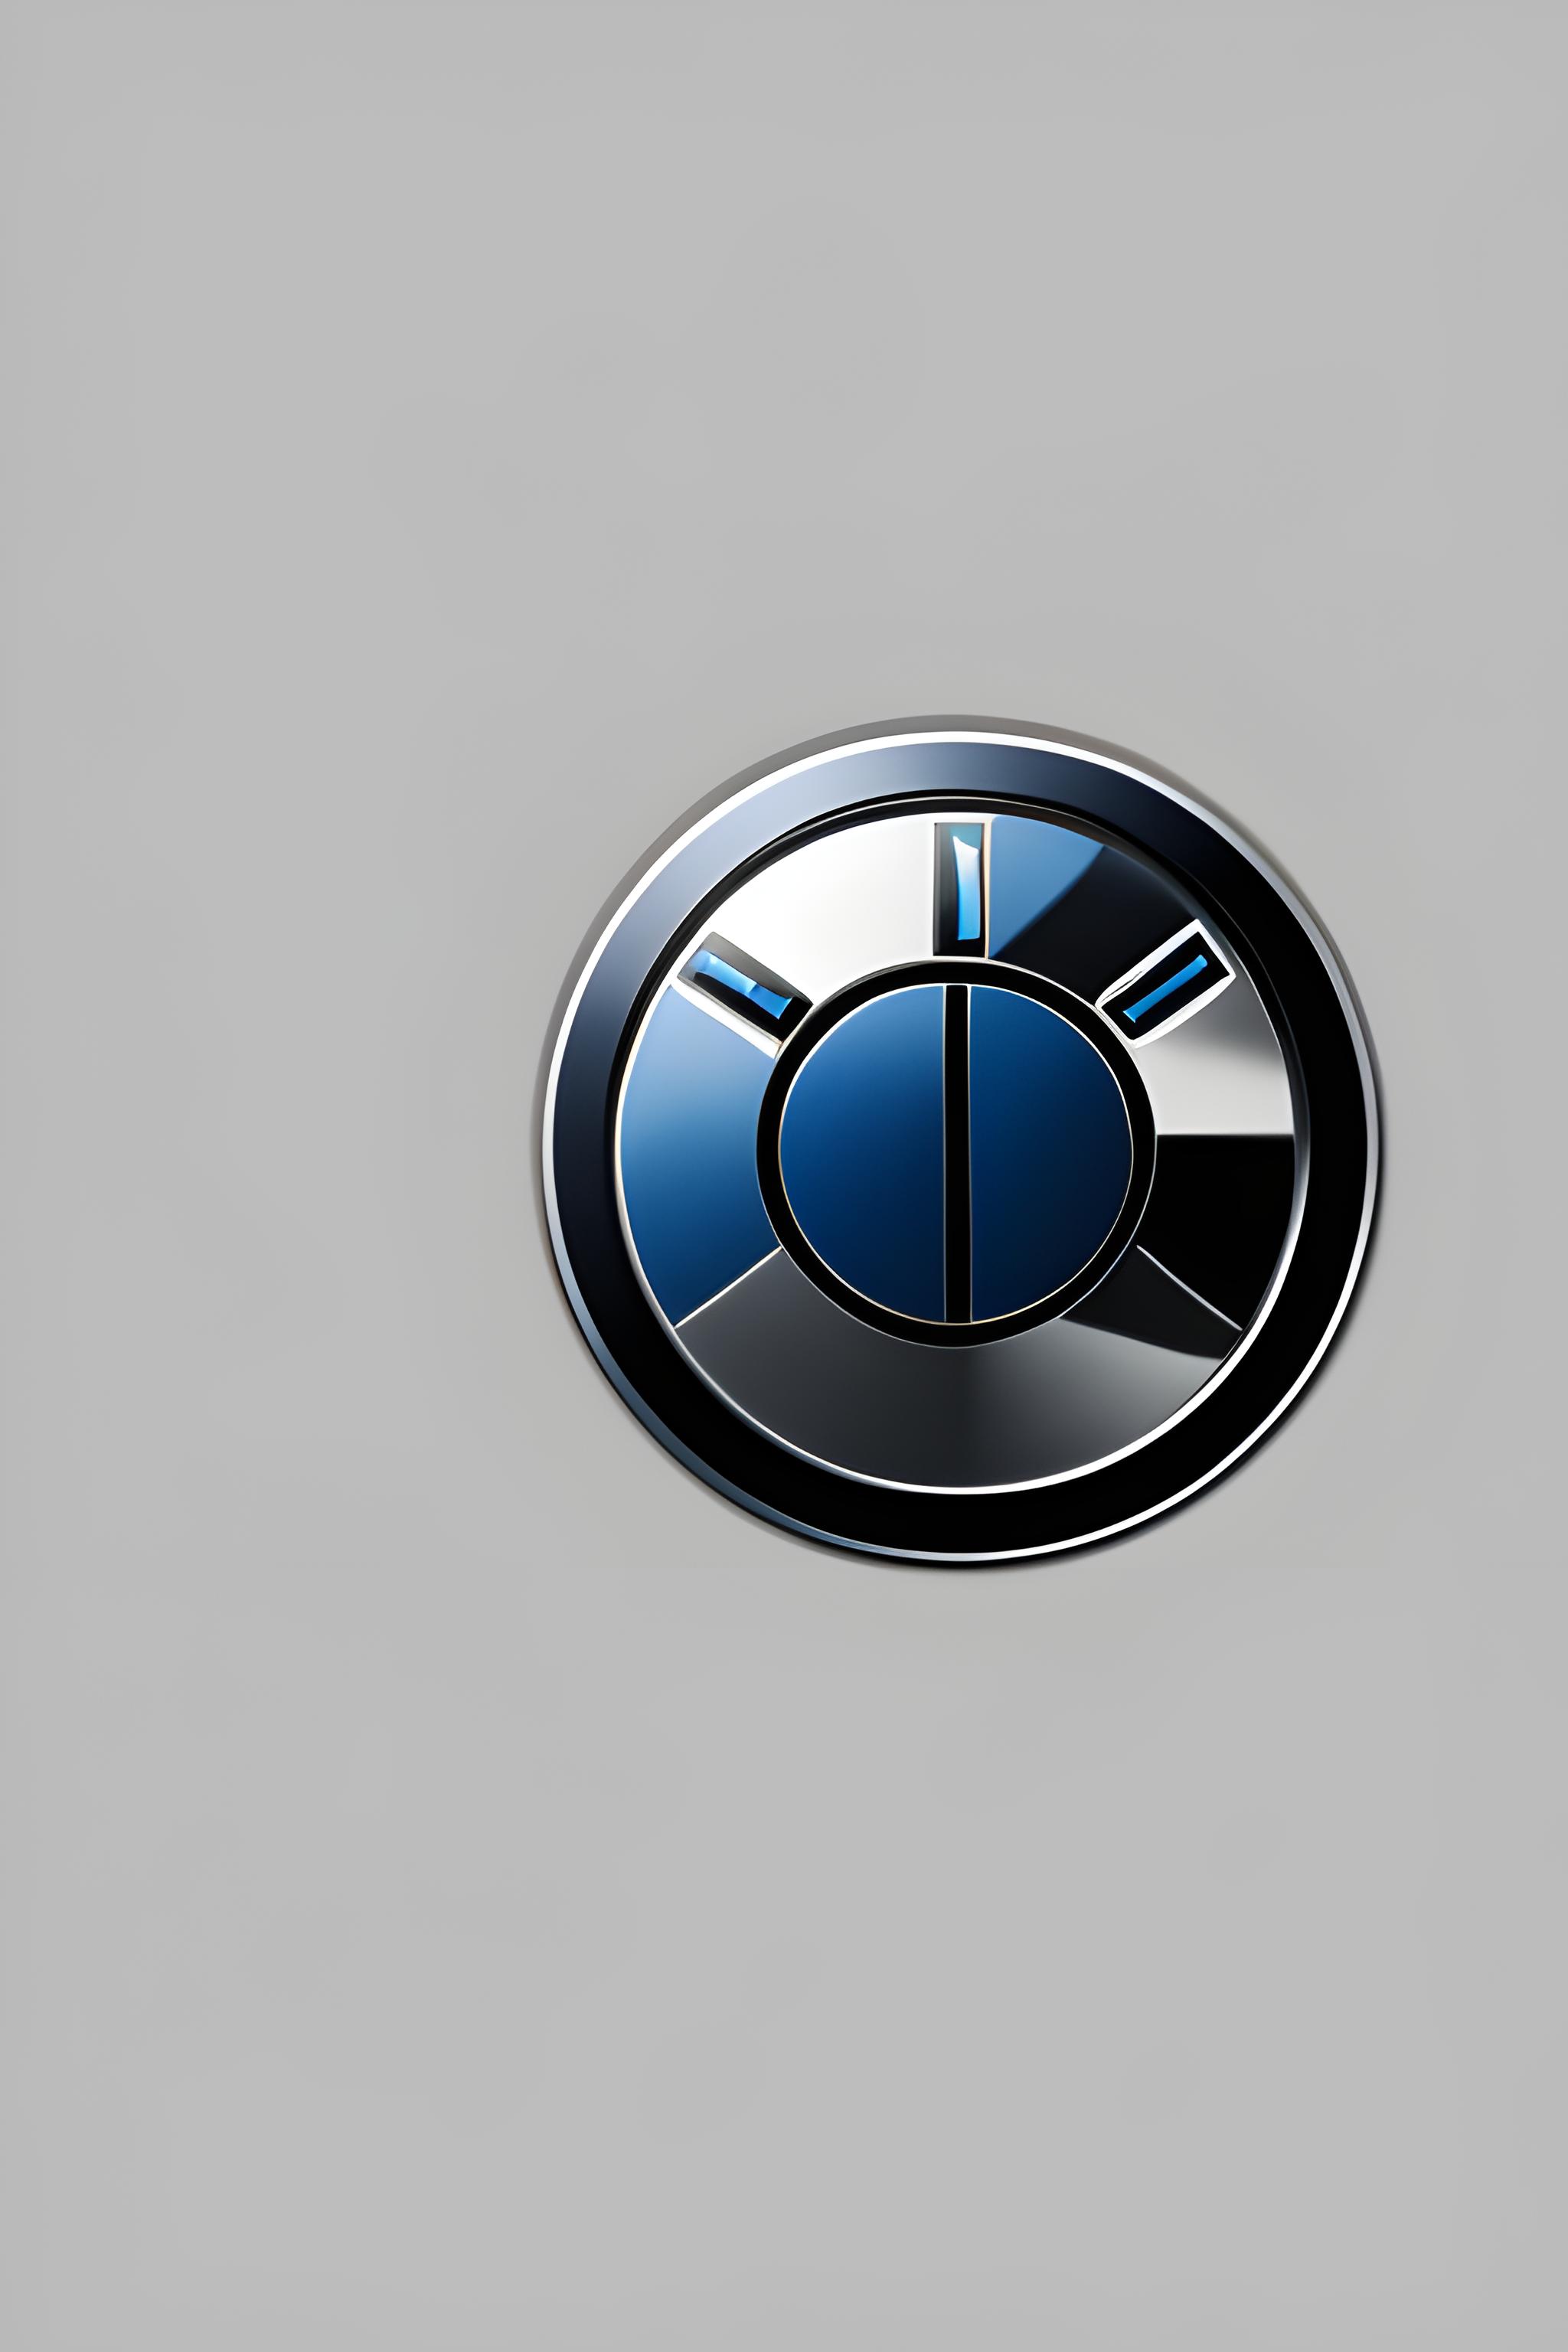 BMW logo with pure pixel hd